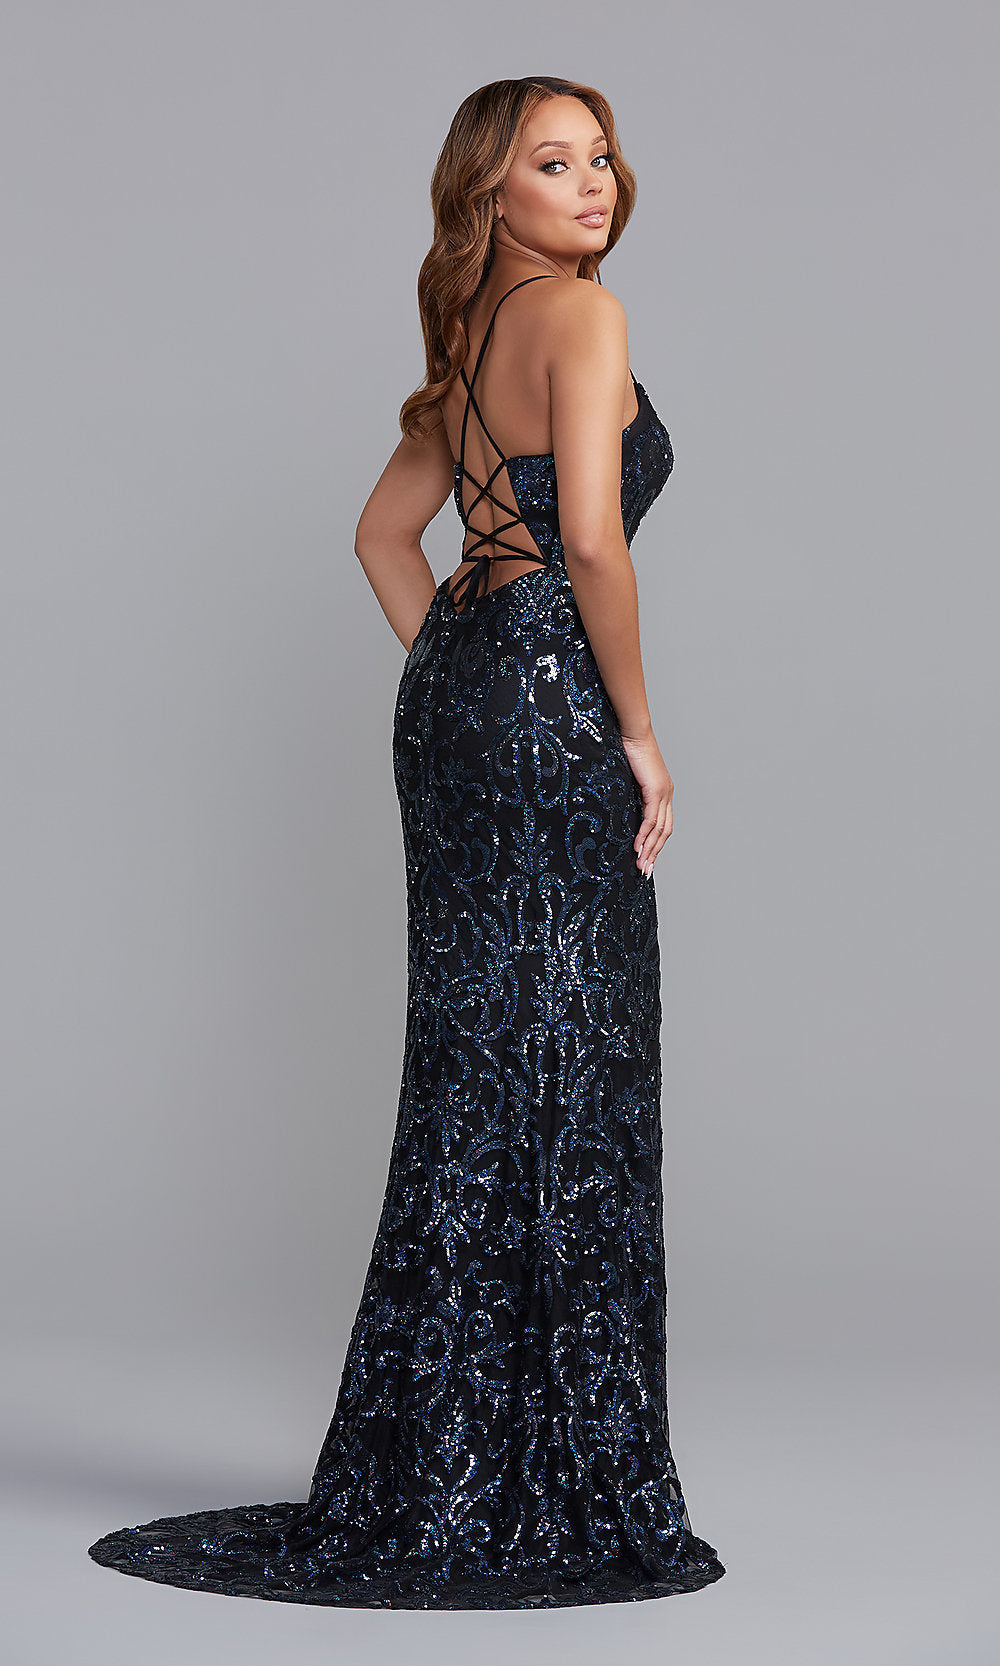 Corset-Style Long Sequin Prom Dress - PromGirl